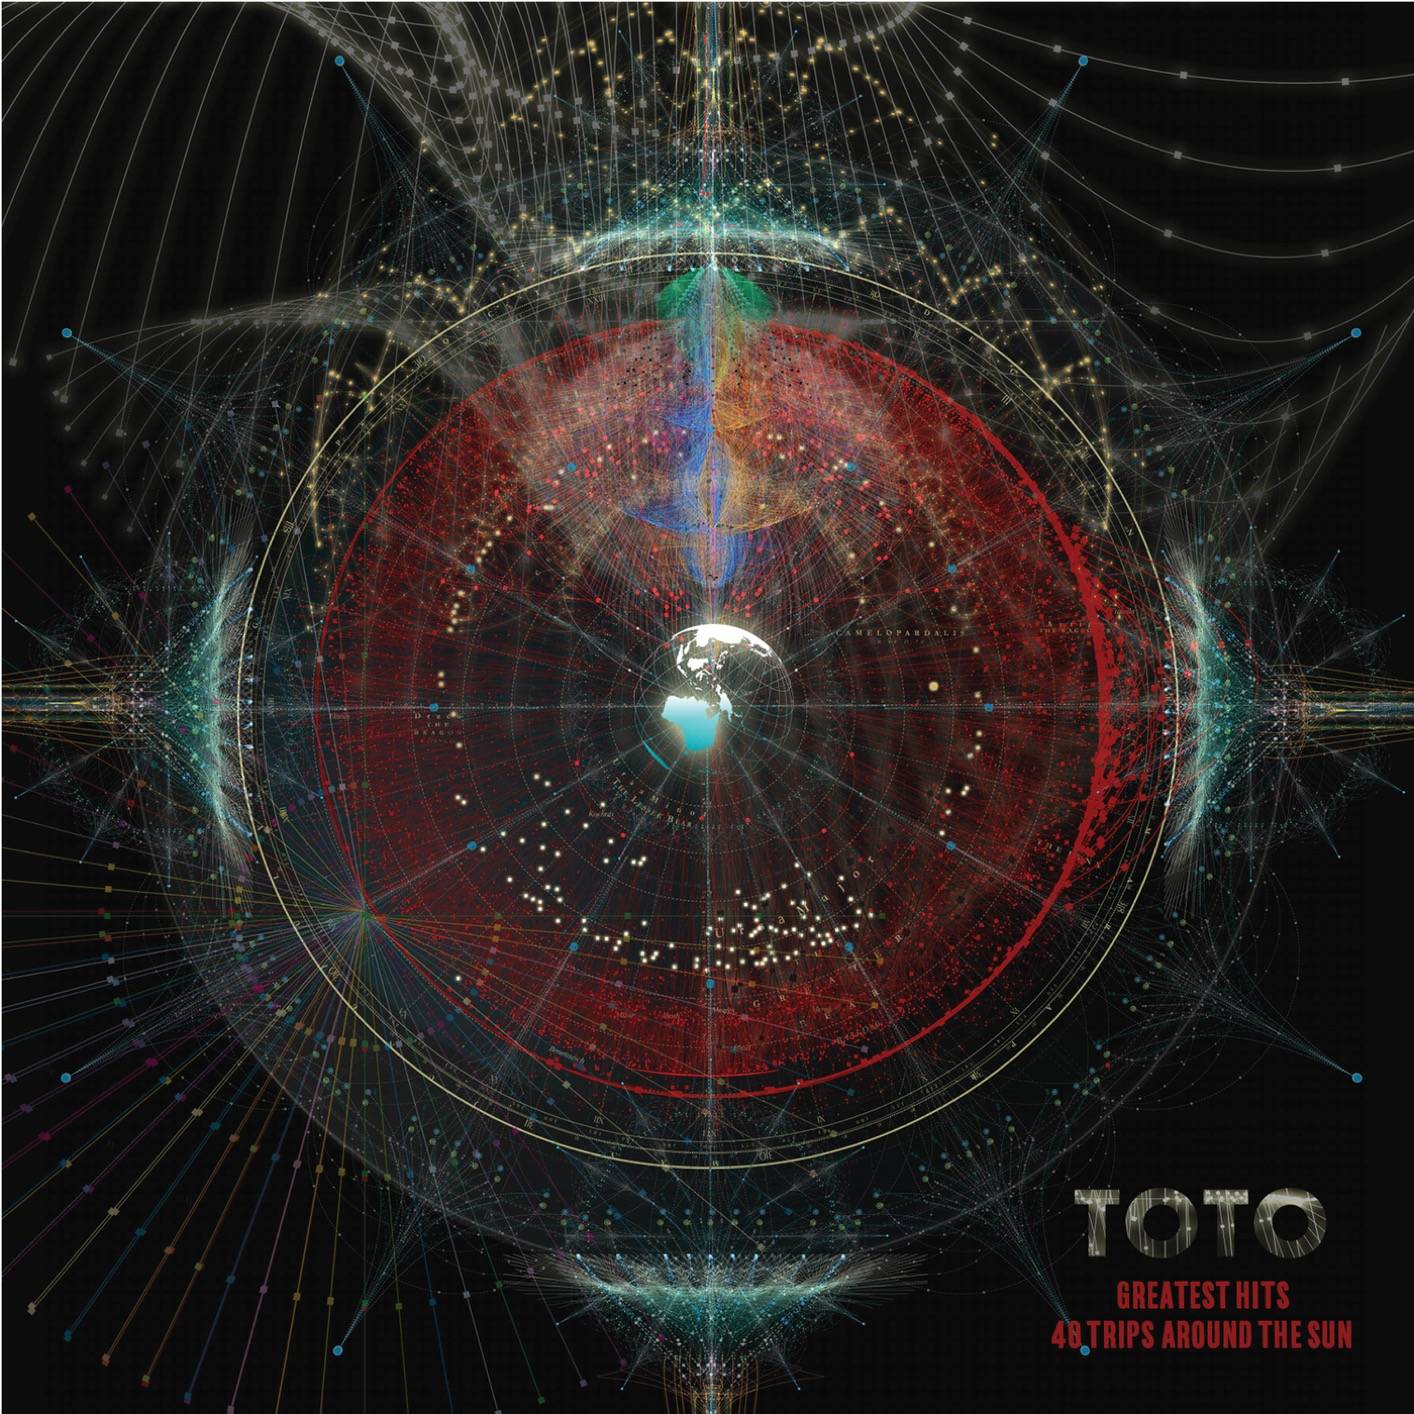 Toto – Greatest Hits: 40 Trips Around The Sun (2018) [FLAC 24bit/44,1kHz]